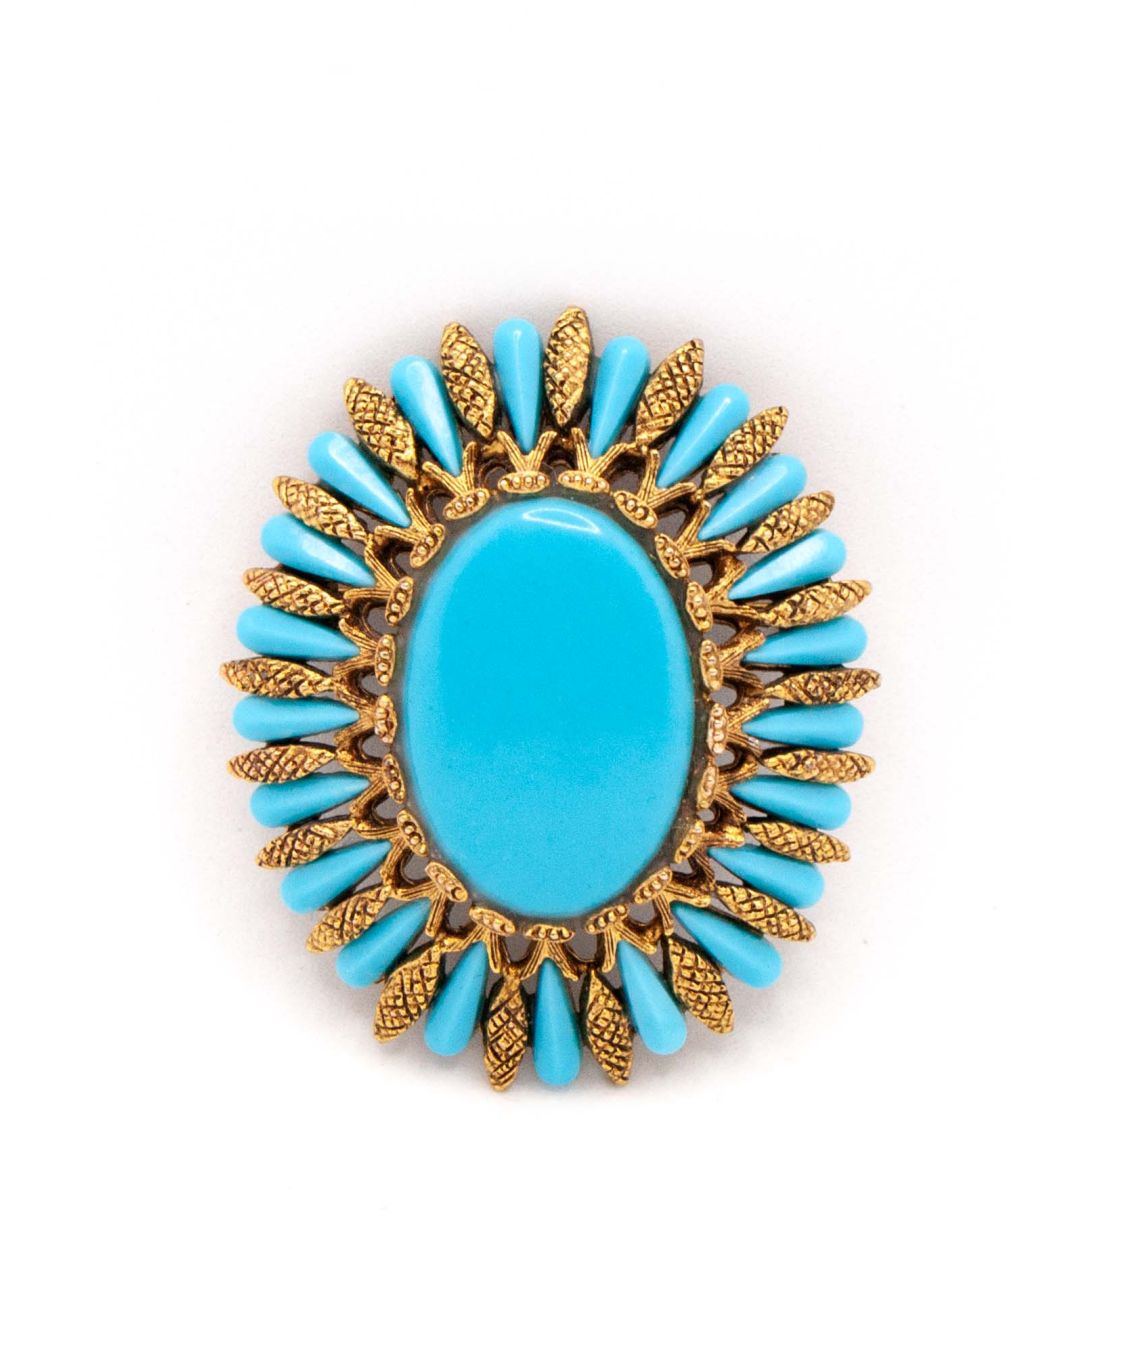 Vintage oval shaped turquoise glass brooch by HAR